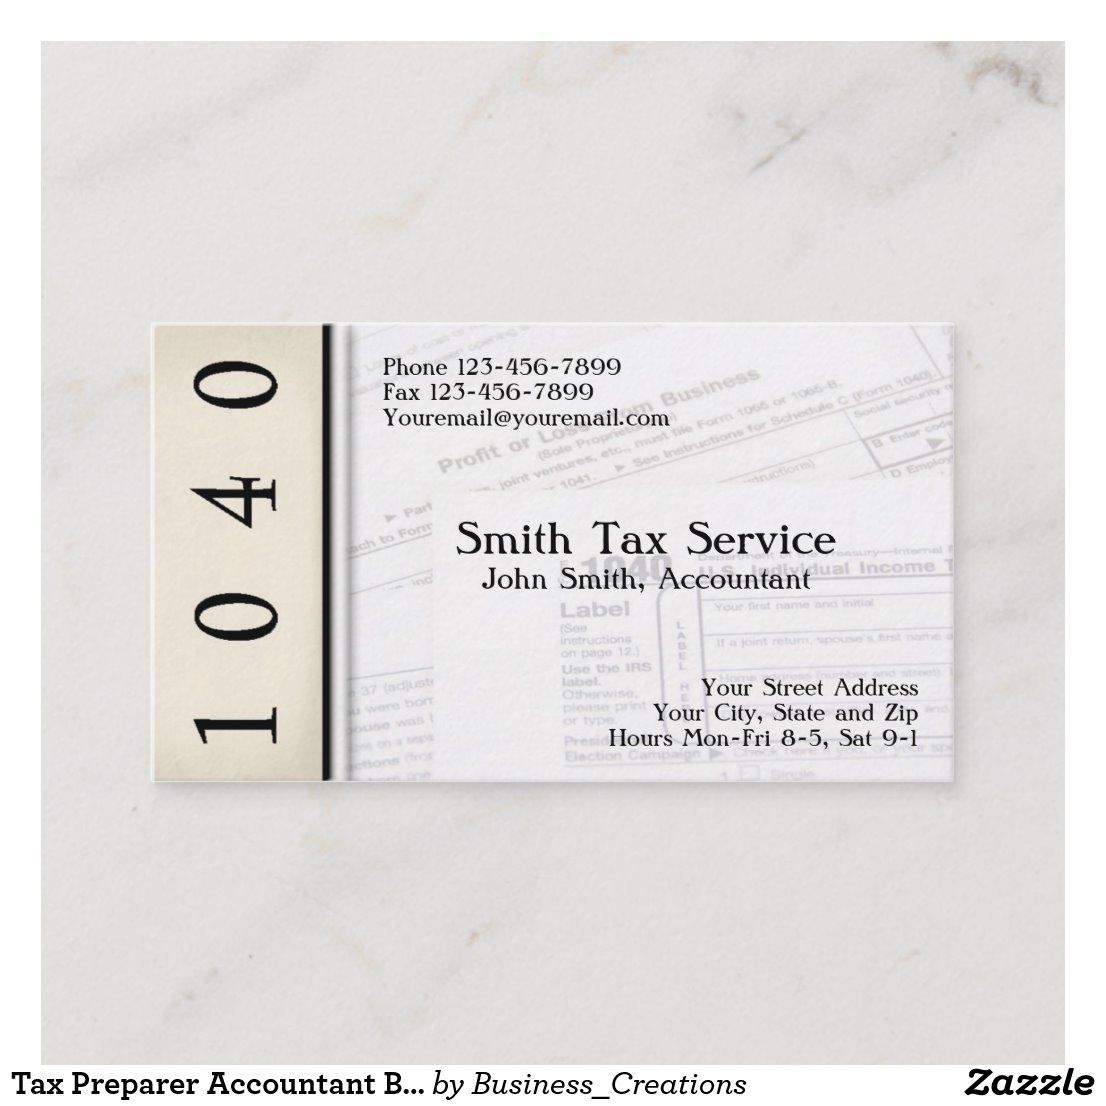 tax preparer business cards example 2